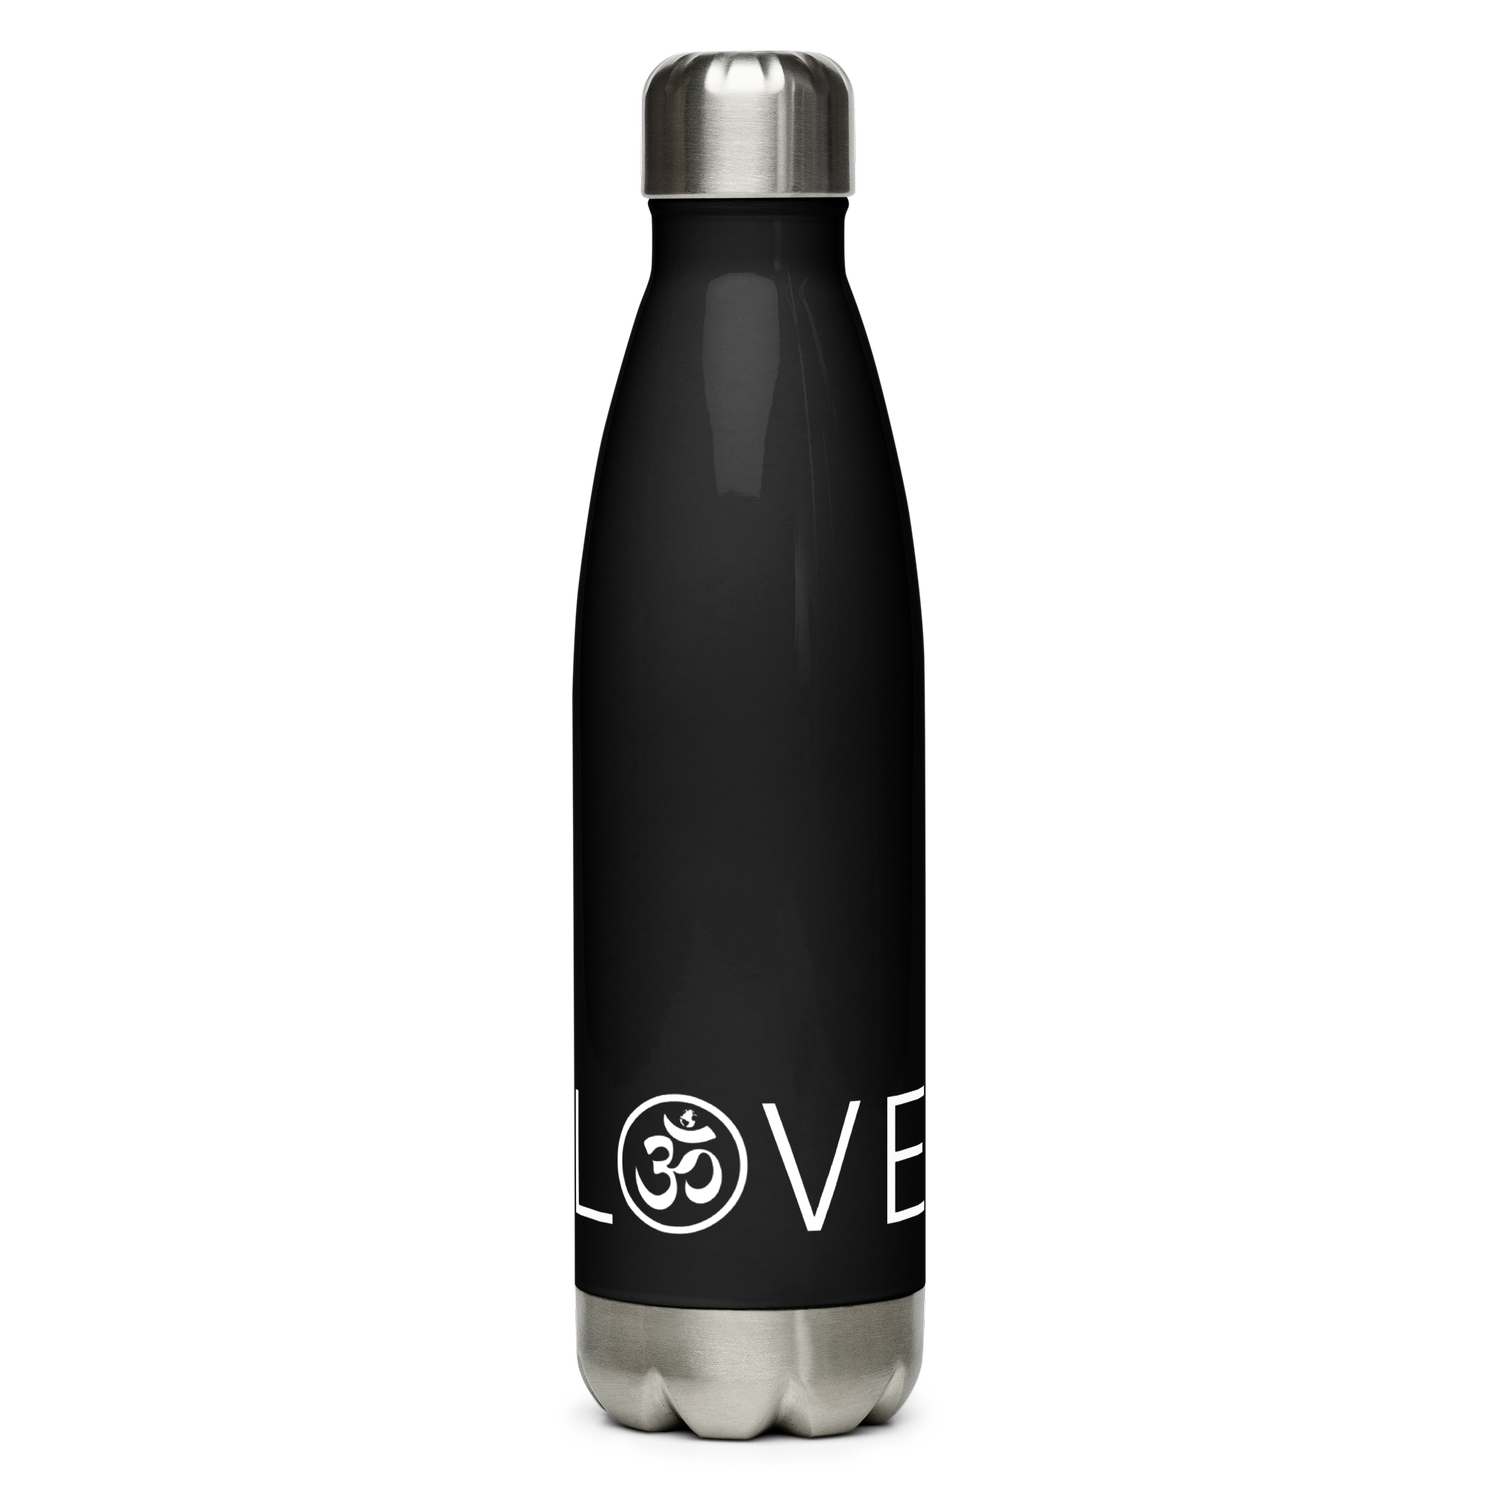 https://images.squarespace-cdn.com/content/v1/63aae51996ab5b338ff1f74a/1678753706629-ZQITS9LEQXNGL7INA3HA/stainless-steel-water-bottle-black-17oz-front-640fbfa0e7320.png?format=1500w